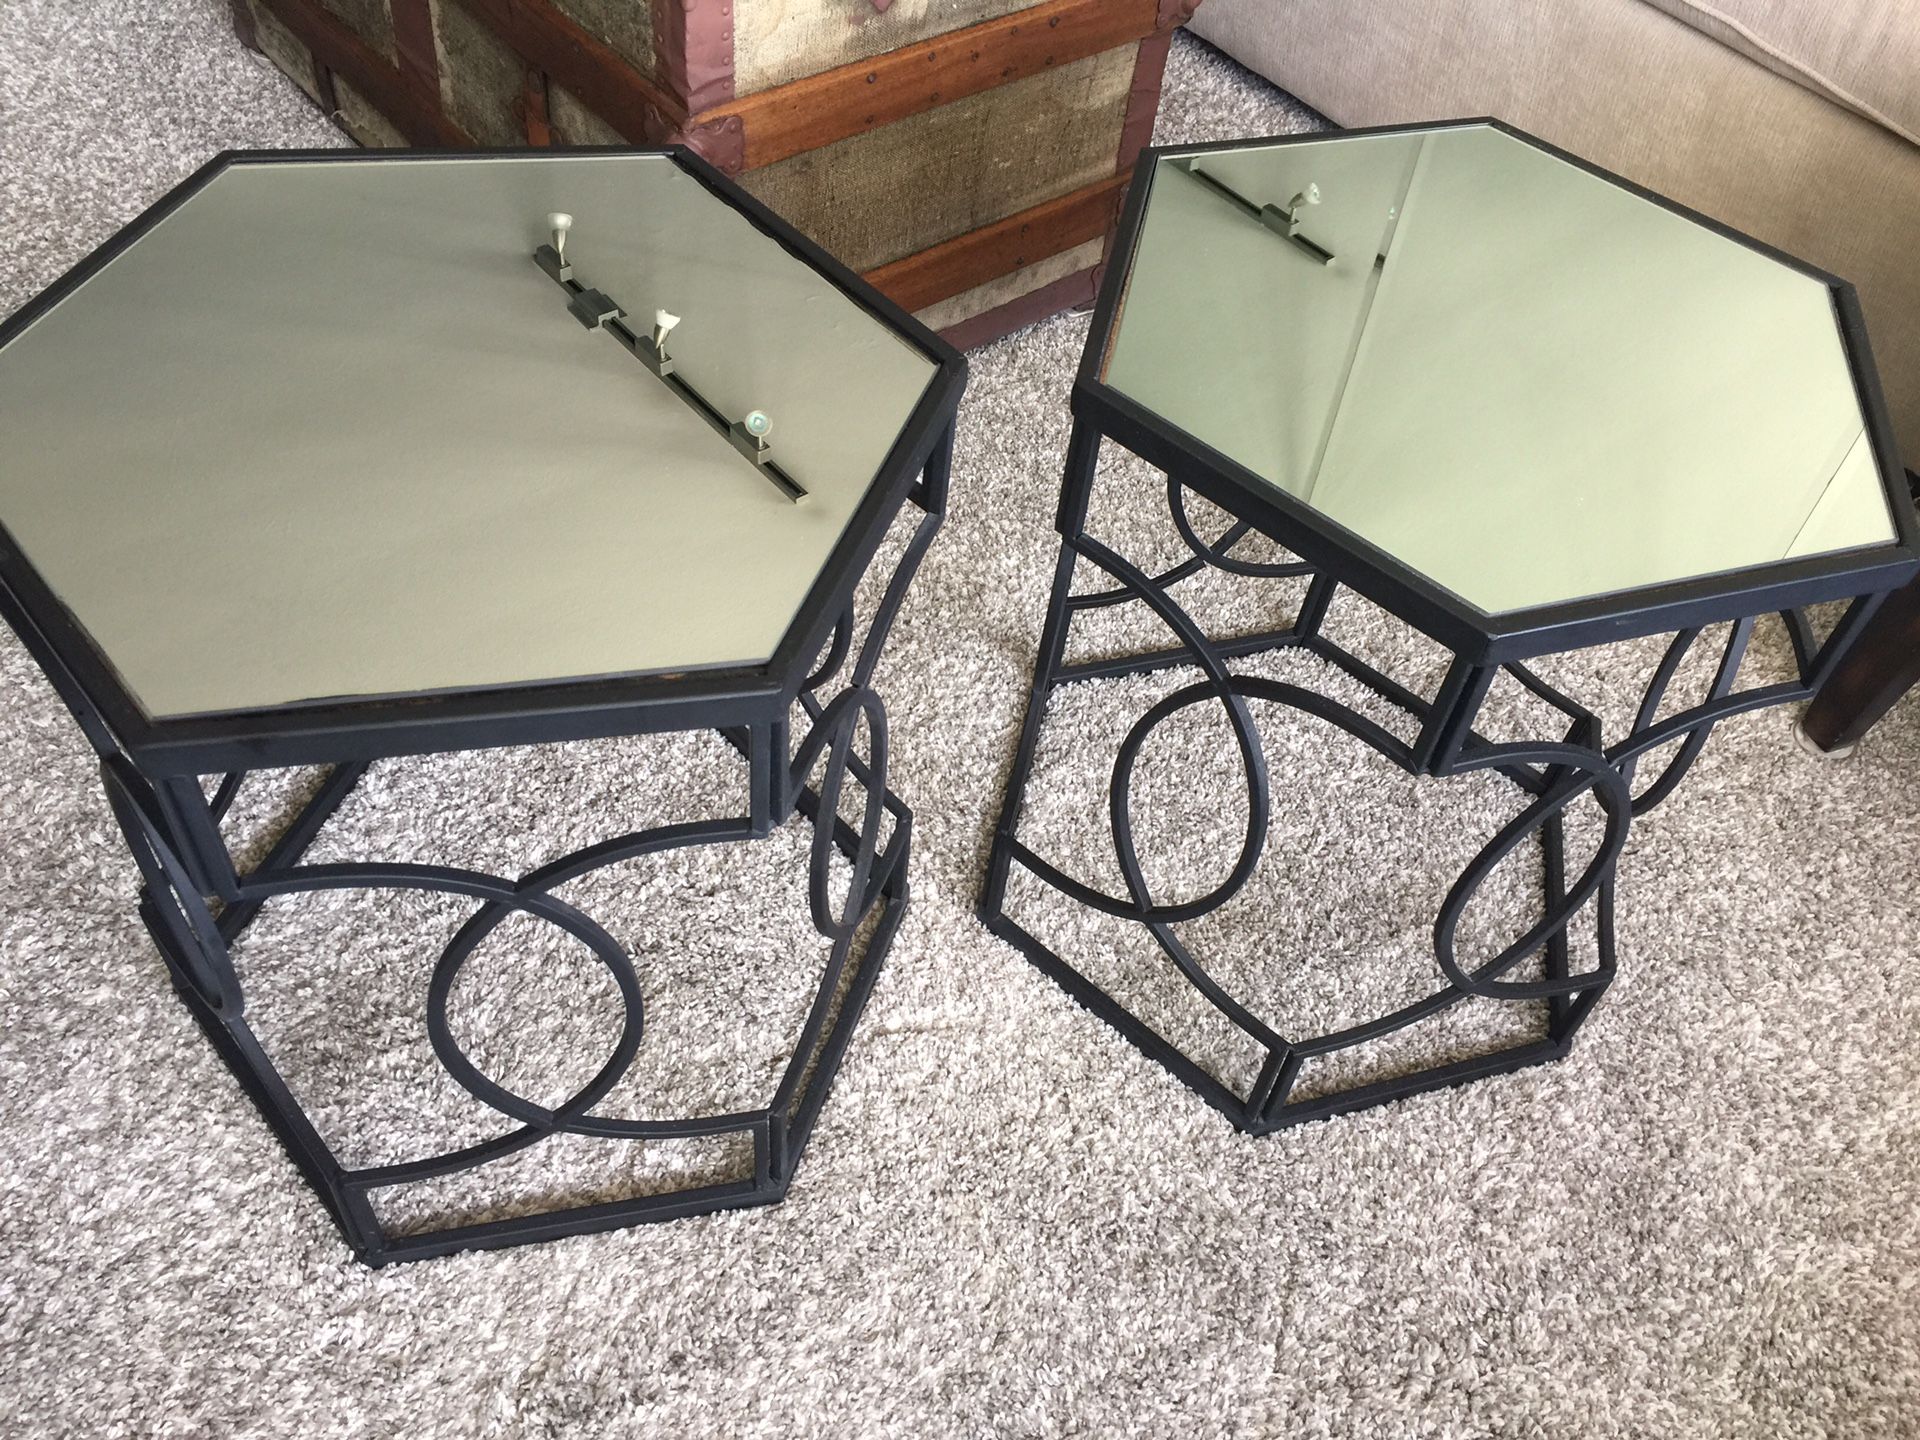 2 matching end tables - mirrored top with black metal frame